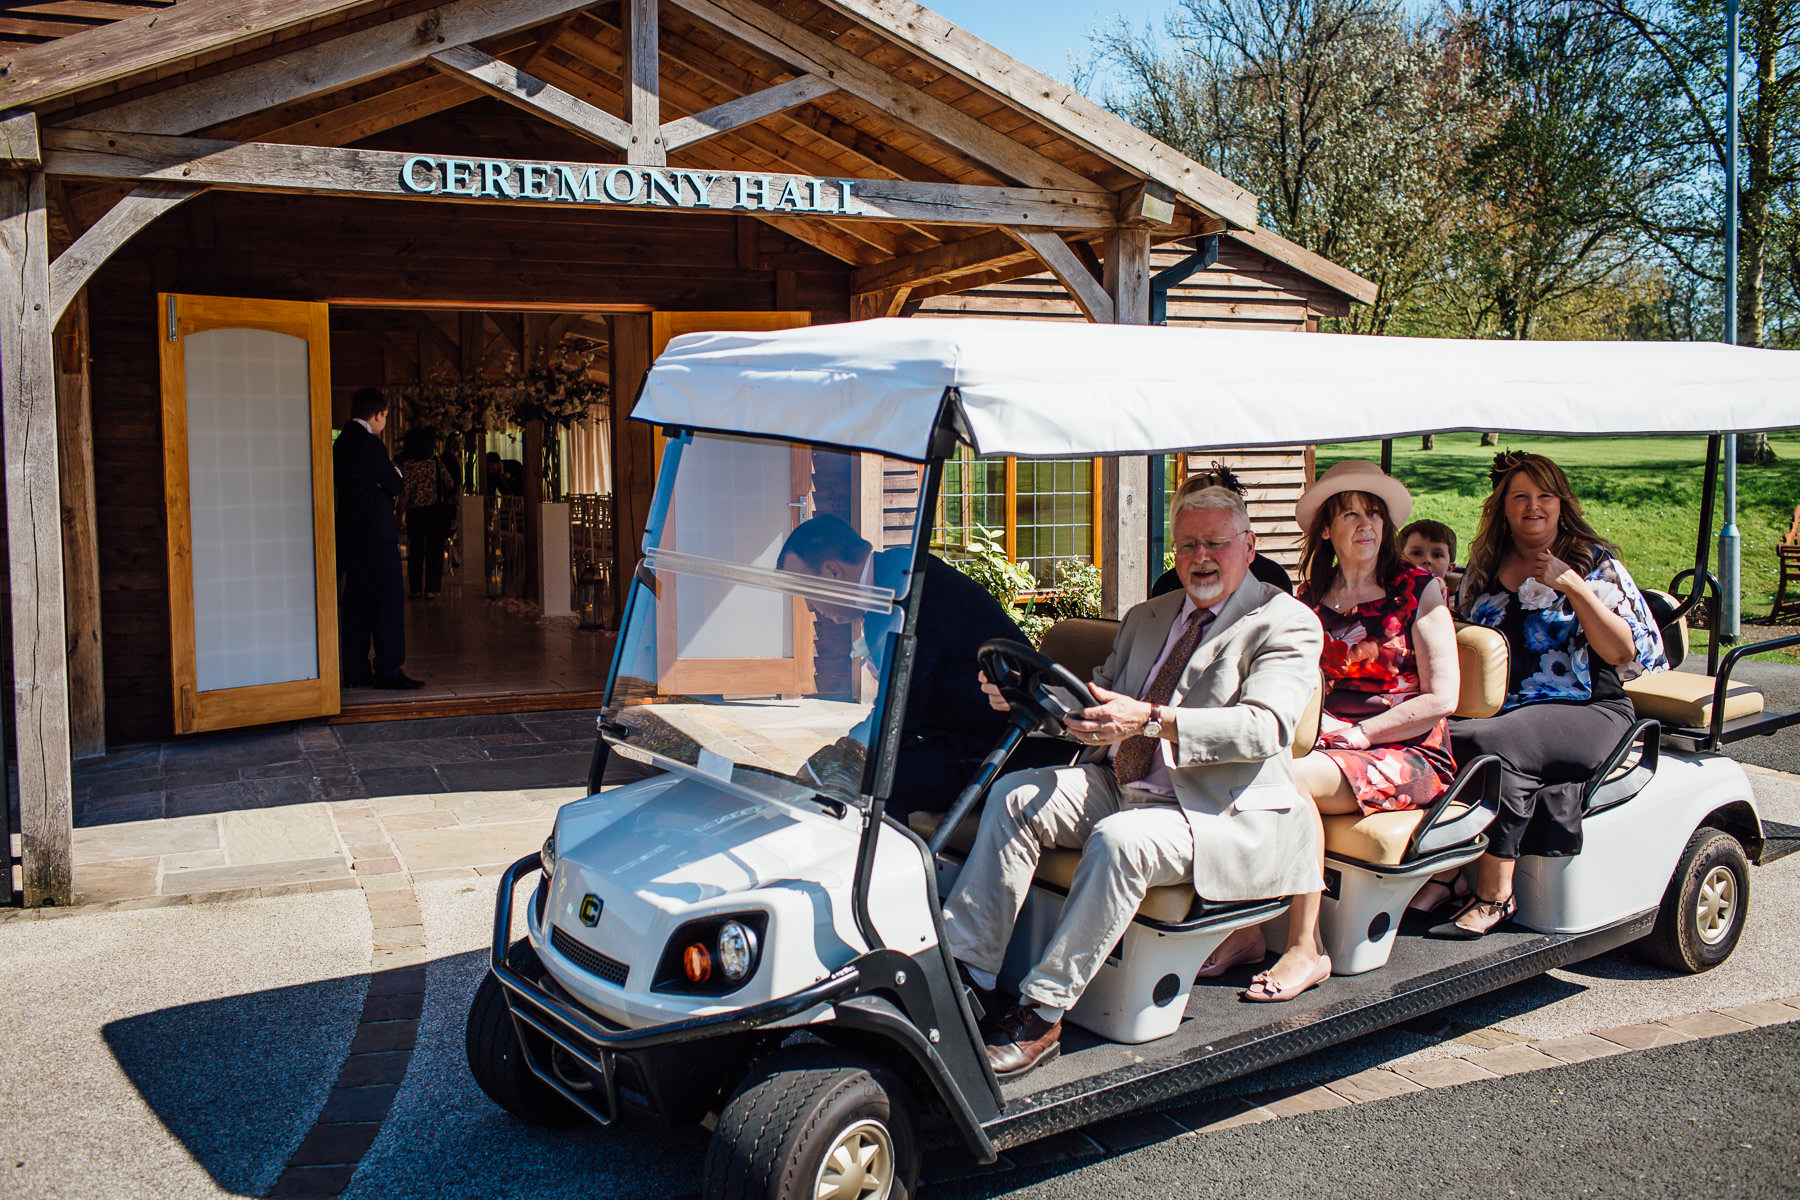 A buggy ride to the ceremony room